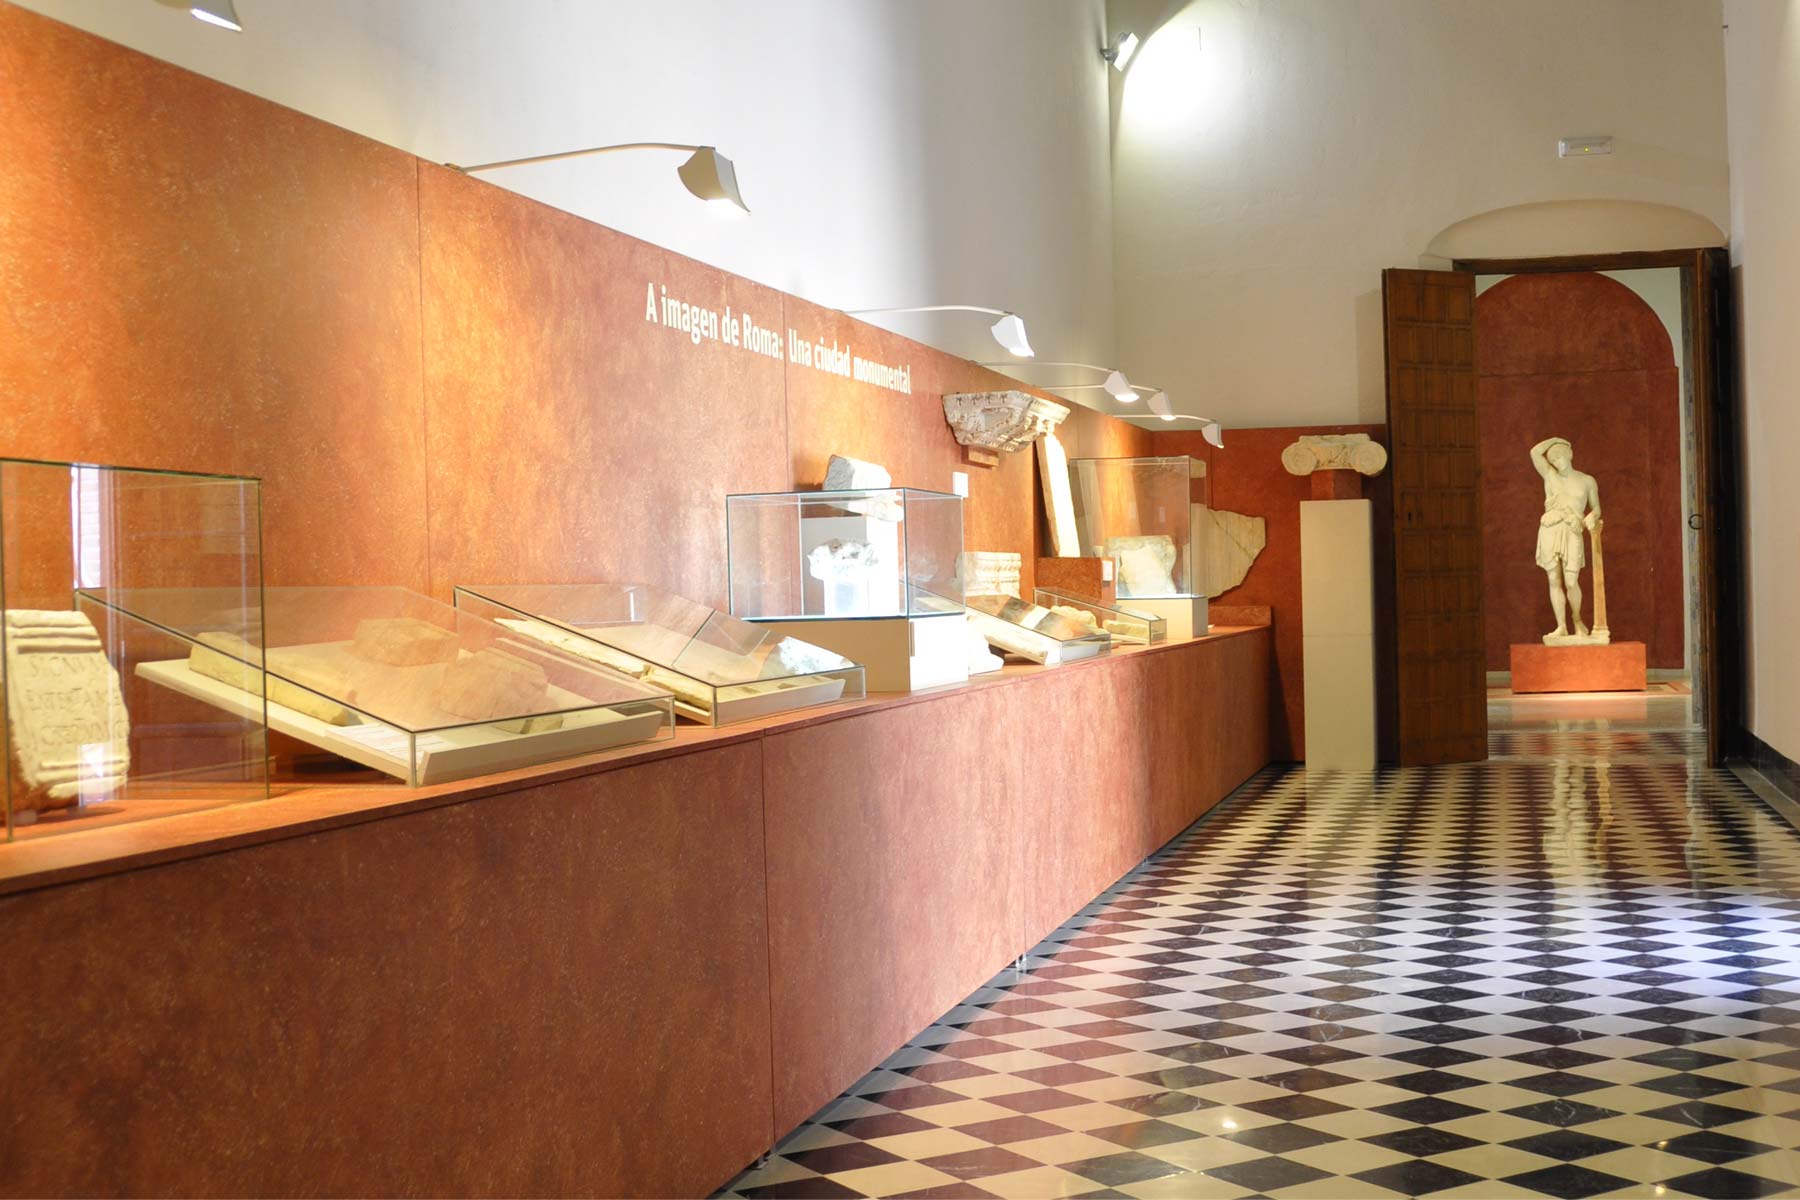 The Municipal Historical Museum has an interesting collection of prehistoric metal pieces, three stelae of warriors, the "Plaque of Ecija" (a unique piece of Tartessian gold work), splendid Roman mosaics and sculptures such as the "Wounded Amazon", and interesting collections of inscriptions, capitals, mosaics and other domestic material from the Roman and Islamic periods.